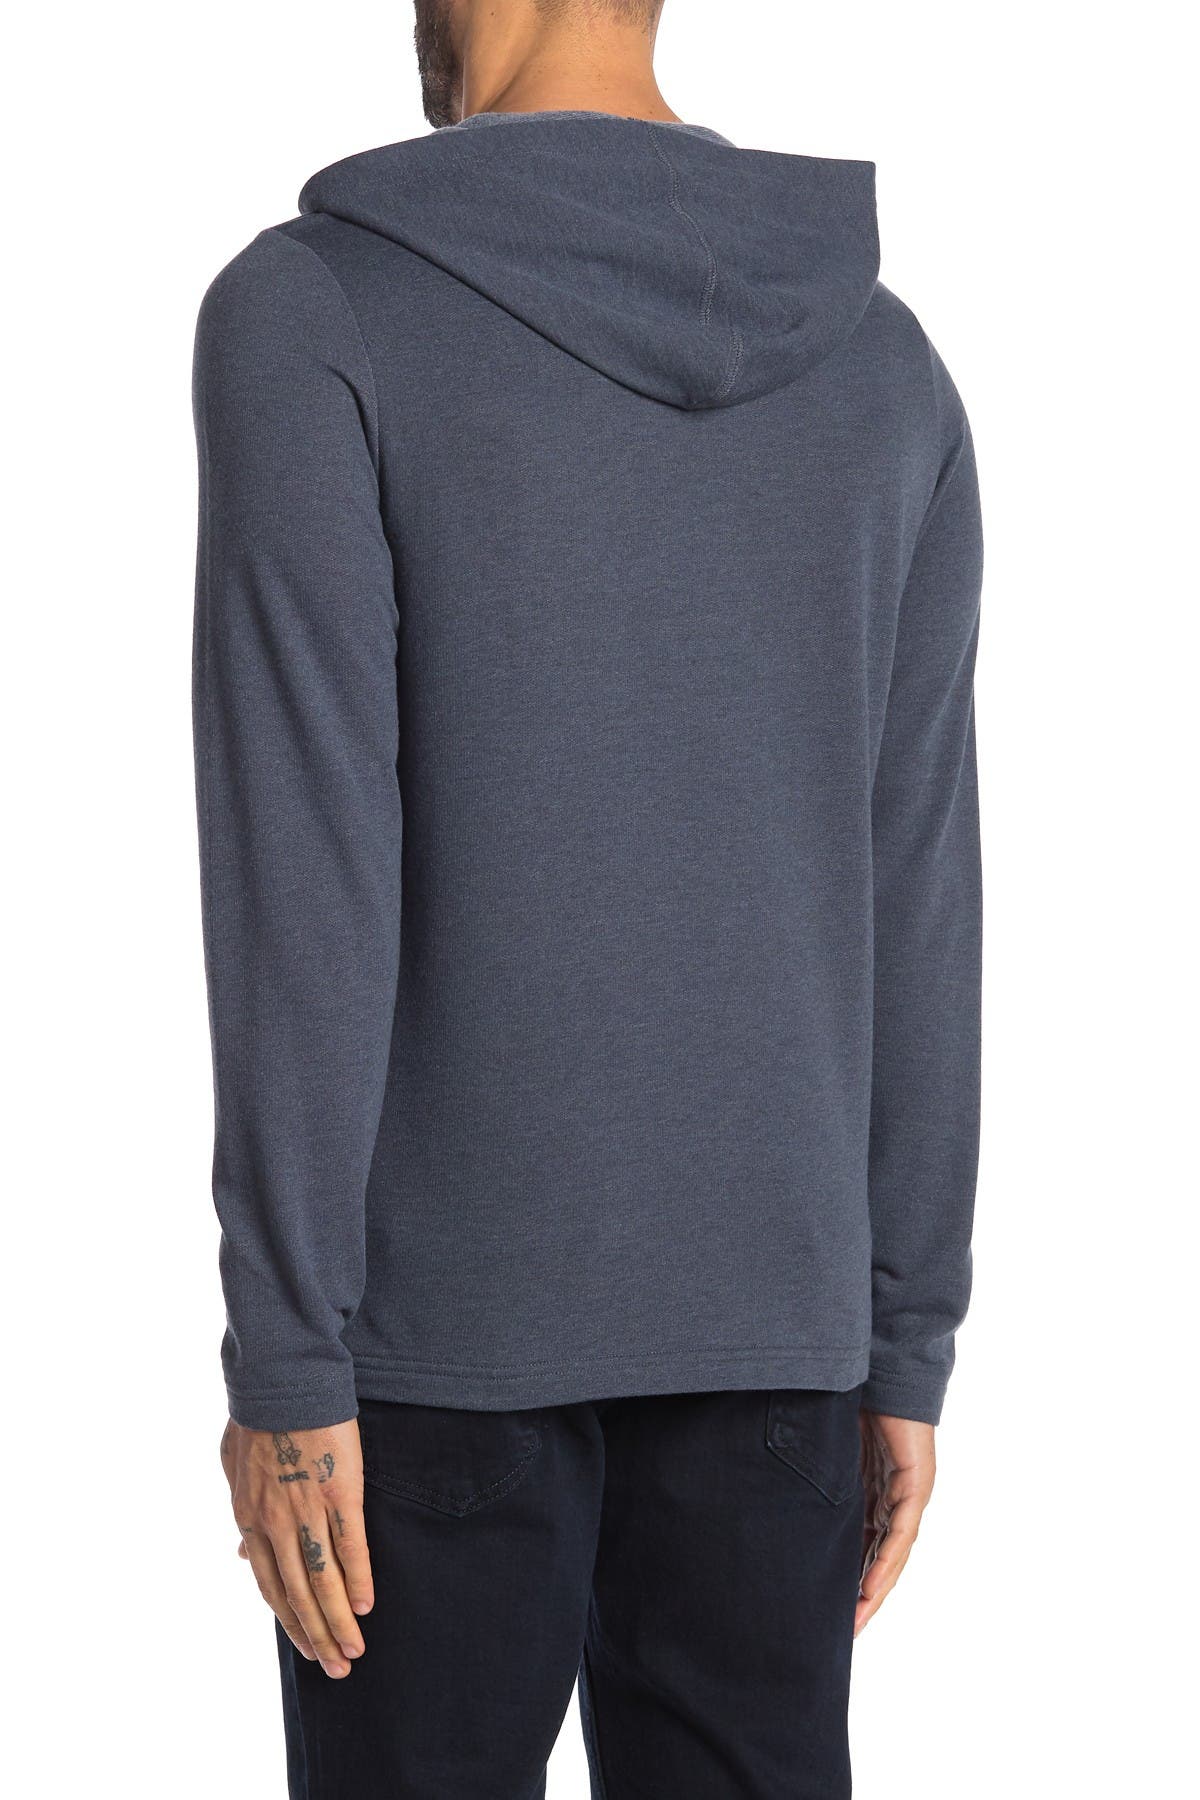 TRAVIS MATHEW | Exits Covered Pullover Hoodie | Nordstrom Rack